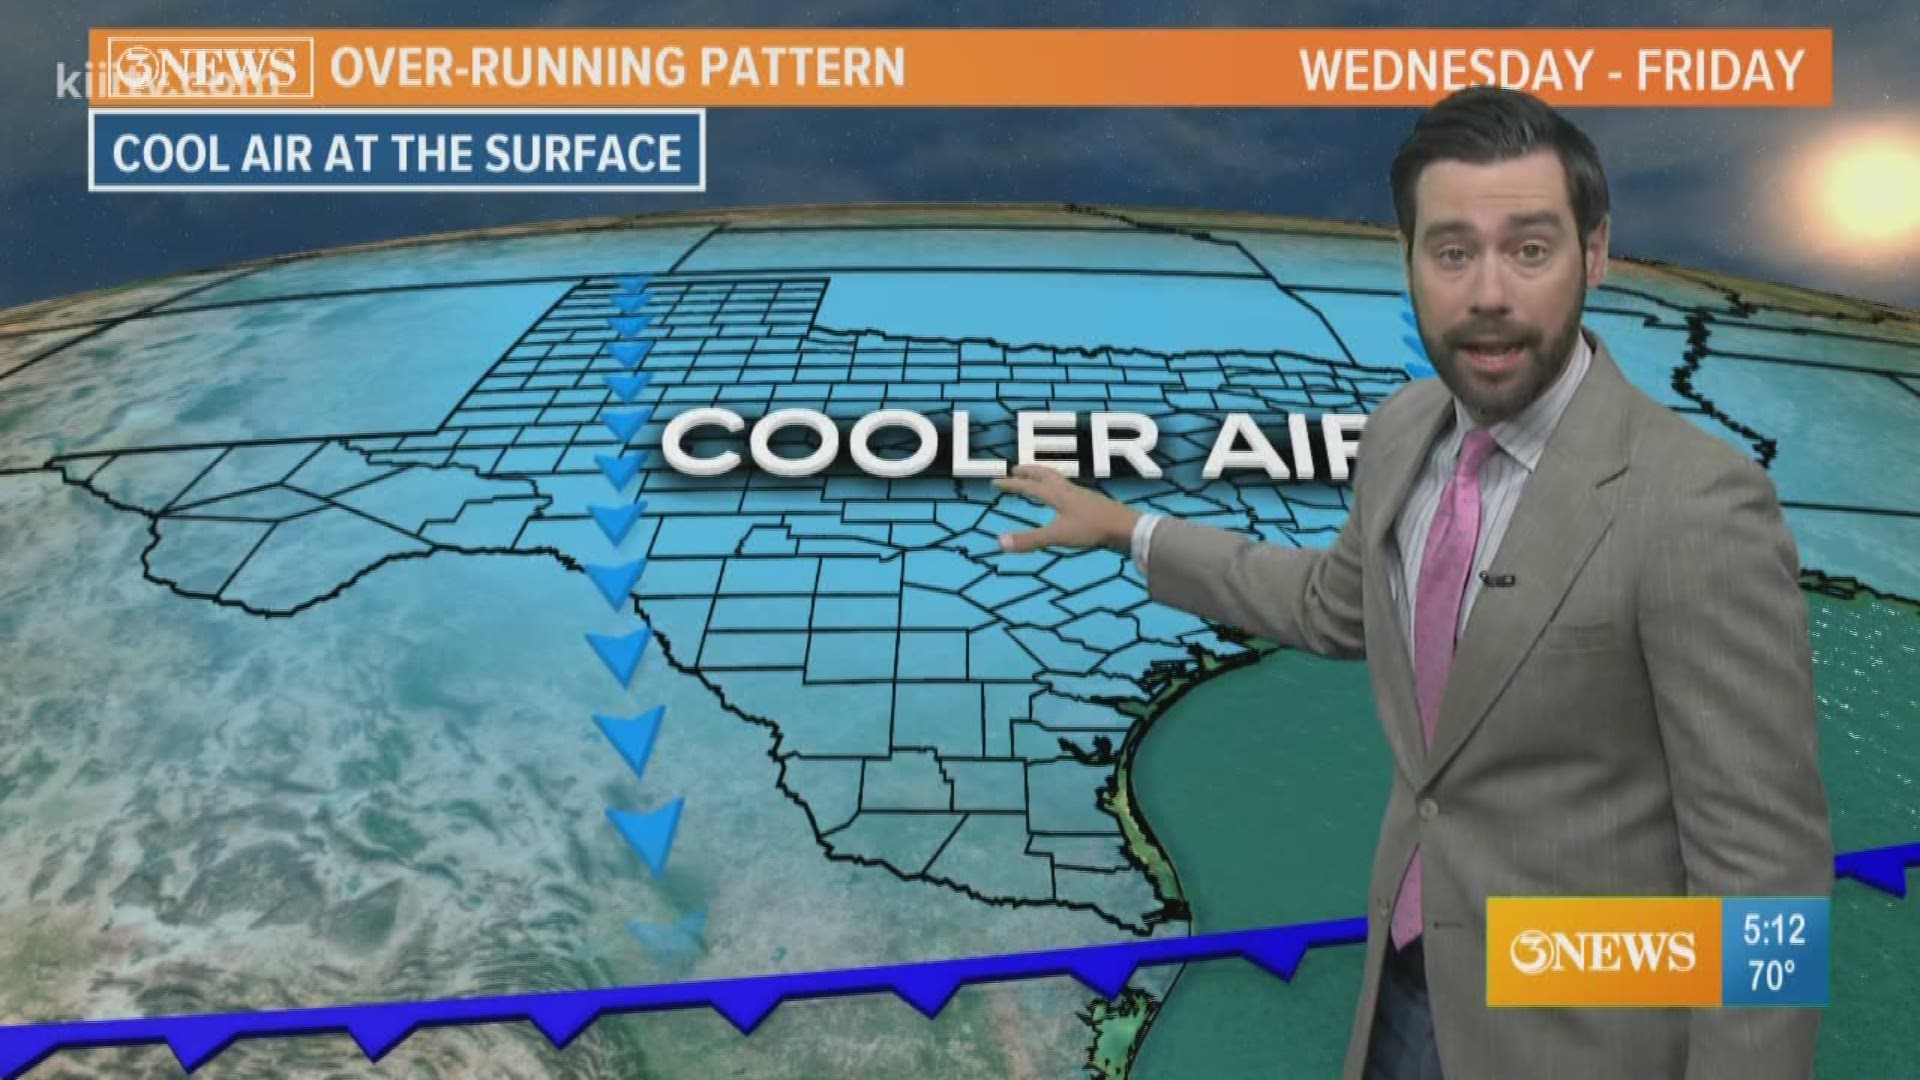 An over-running set up will take place Wednesday through Friday, leading to cool, damp weather.